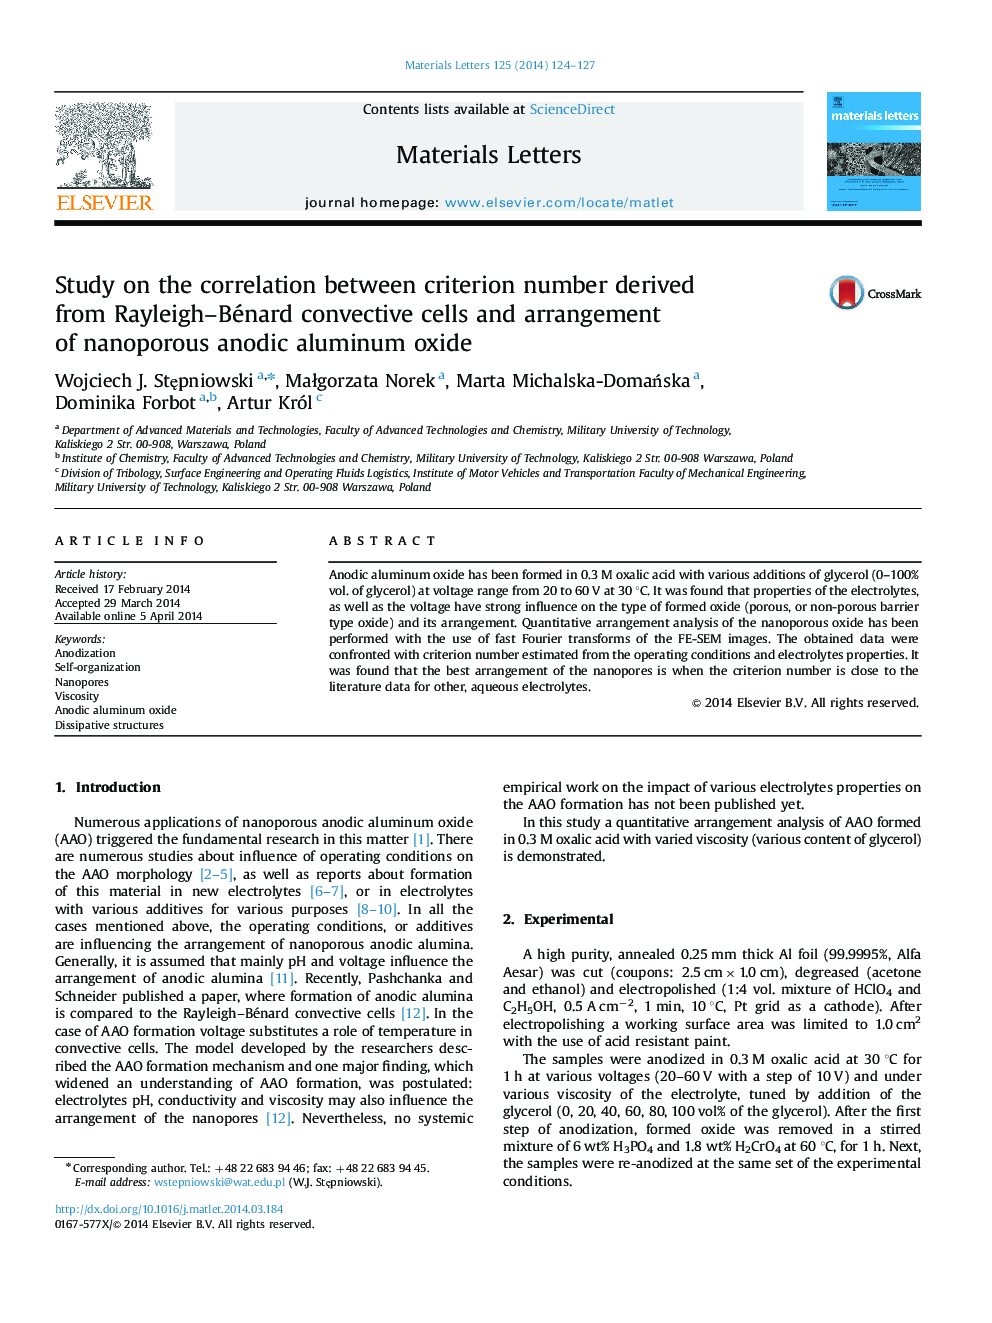 Study on the correlation between criterion number derived from Rayleigh–Bénard convective cells and arrangement of nanoporous anodic aluminum oxide